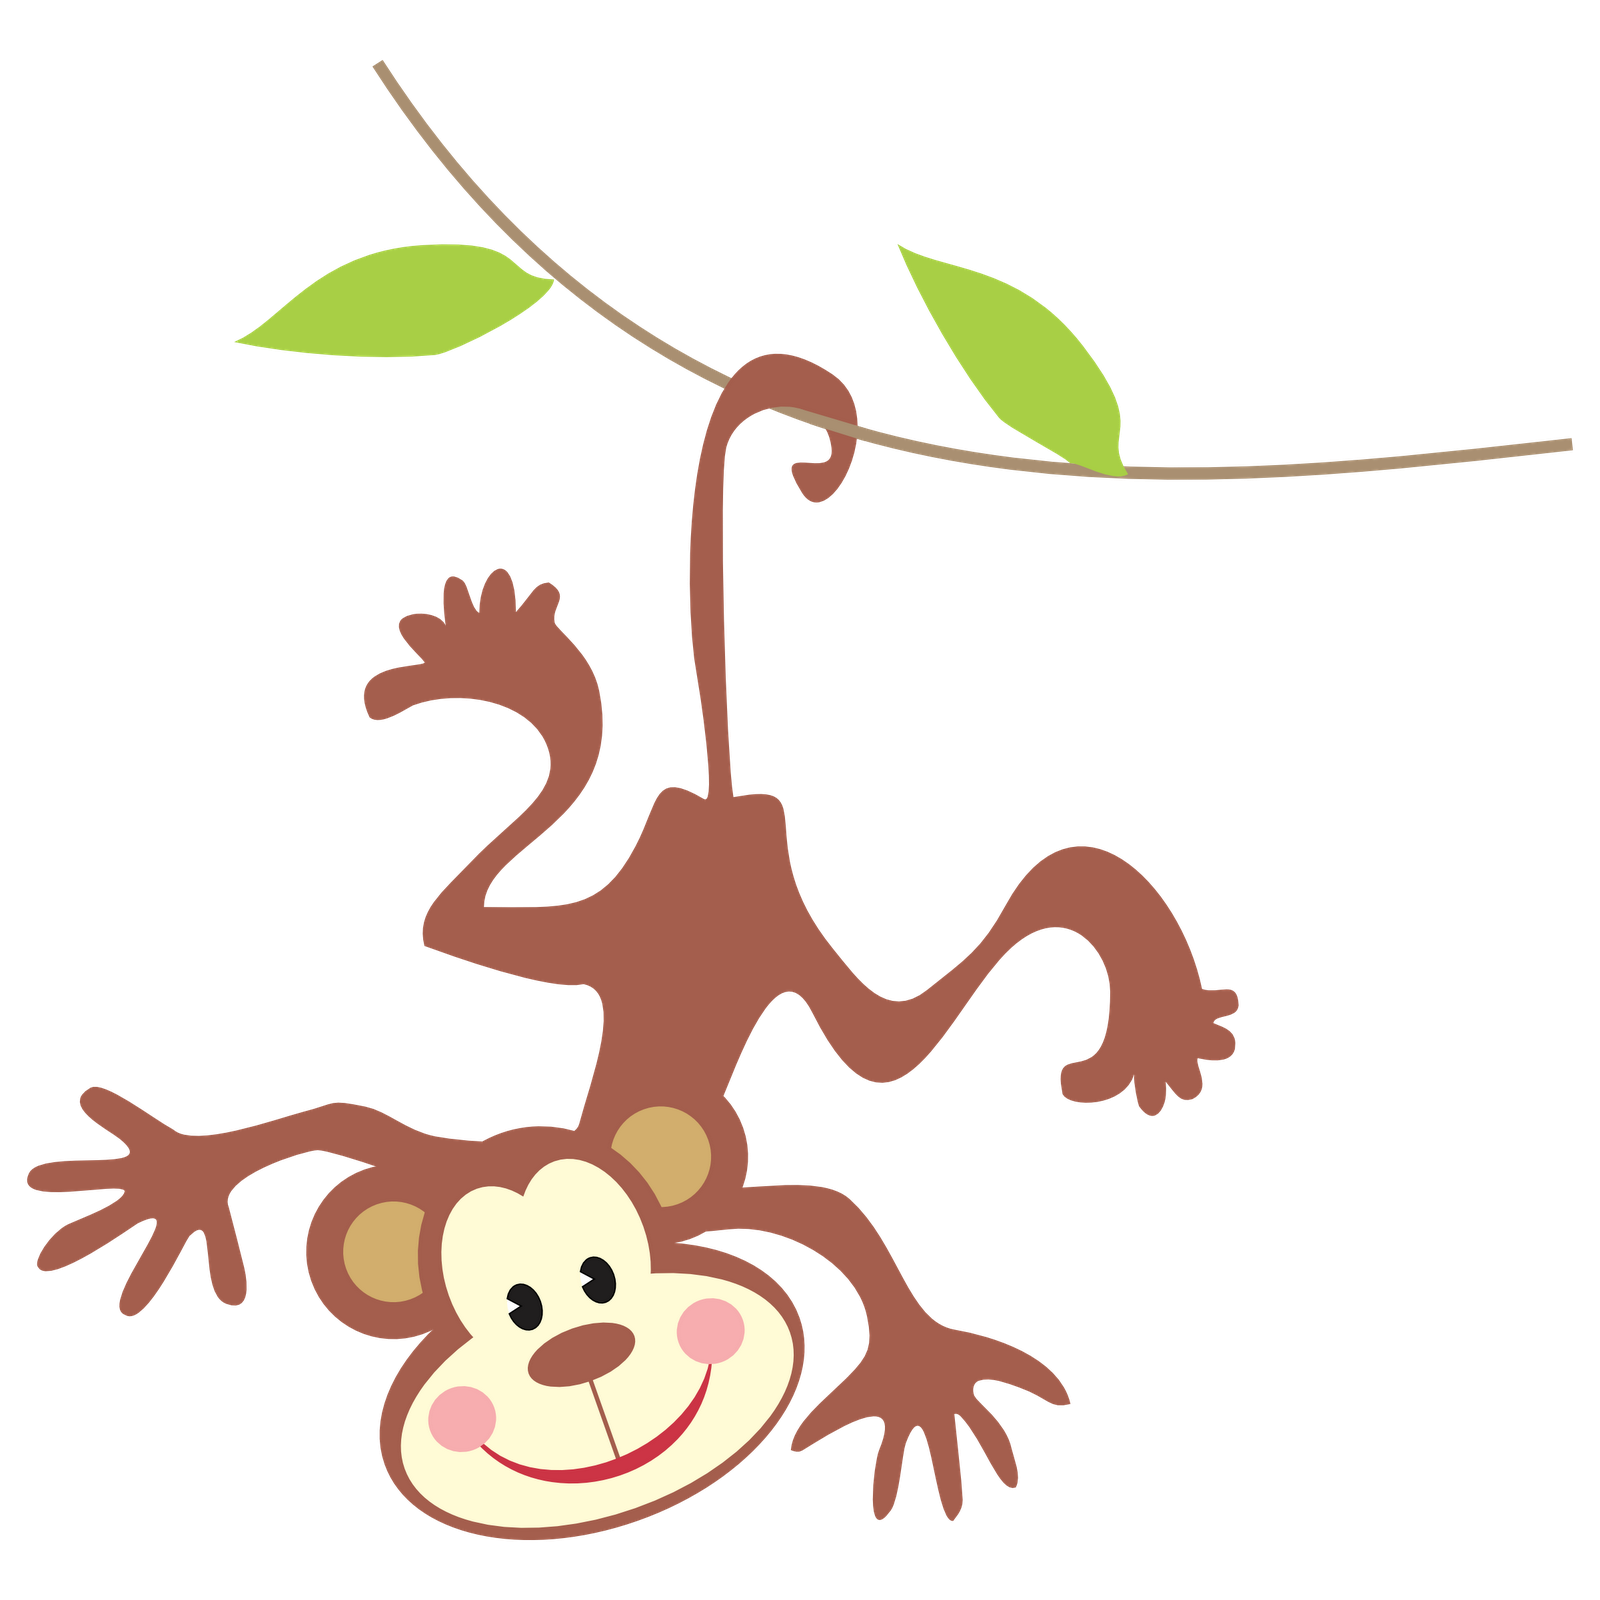 Hanging Monkey Clipart   Clipart Panda   Free Clipart Images